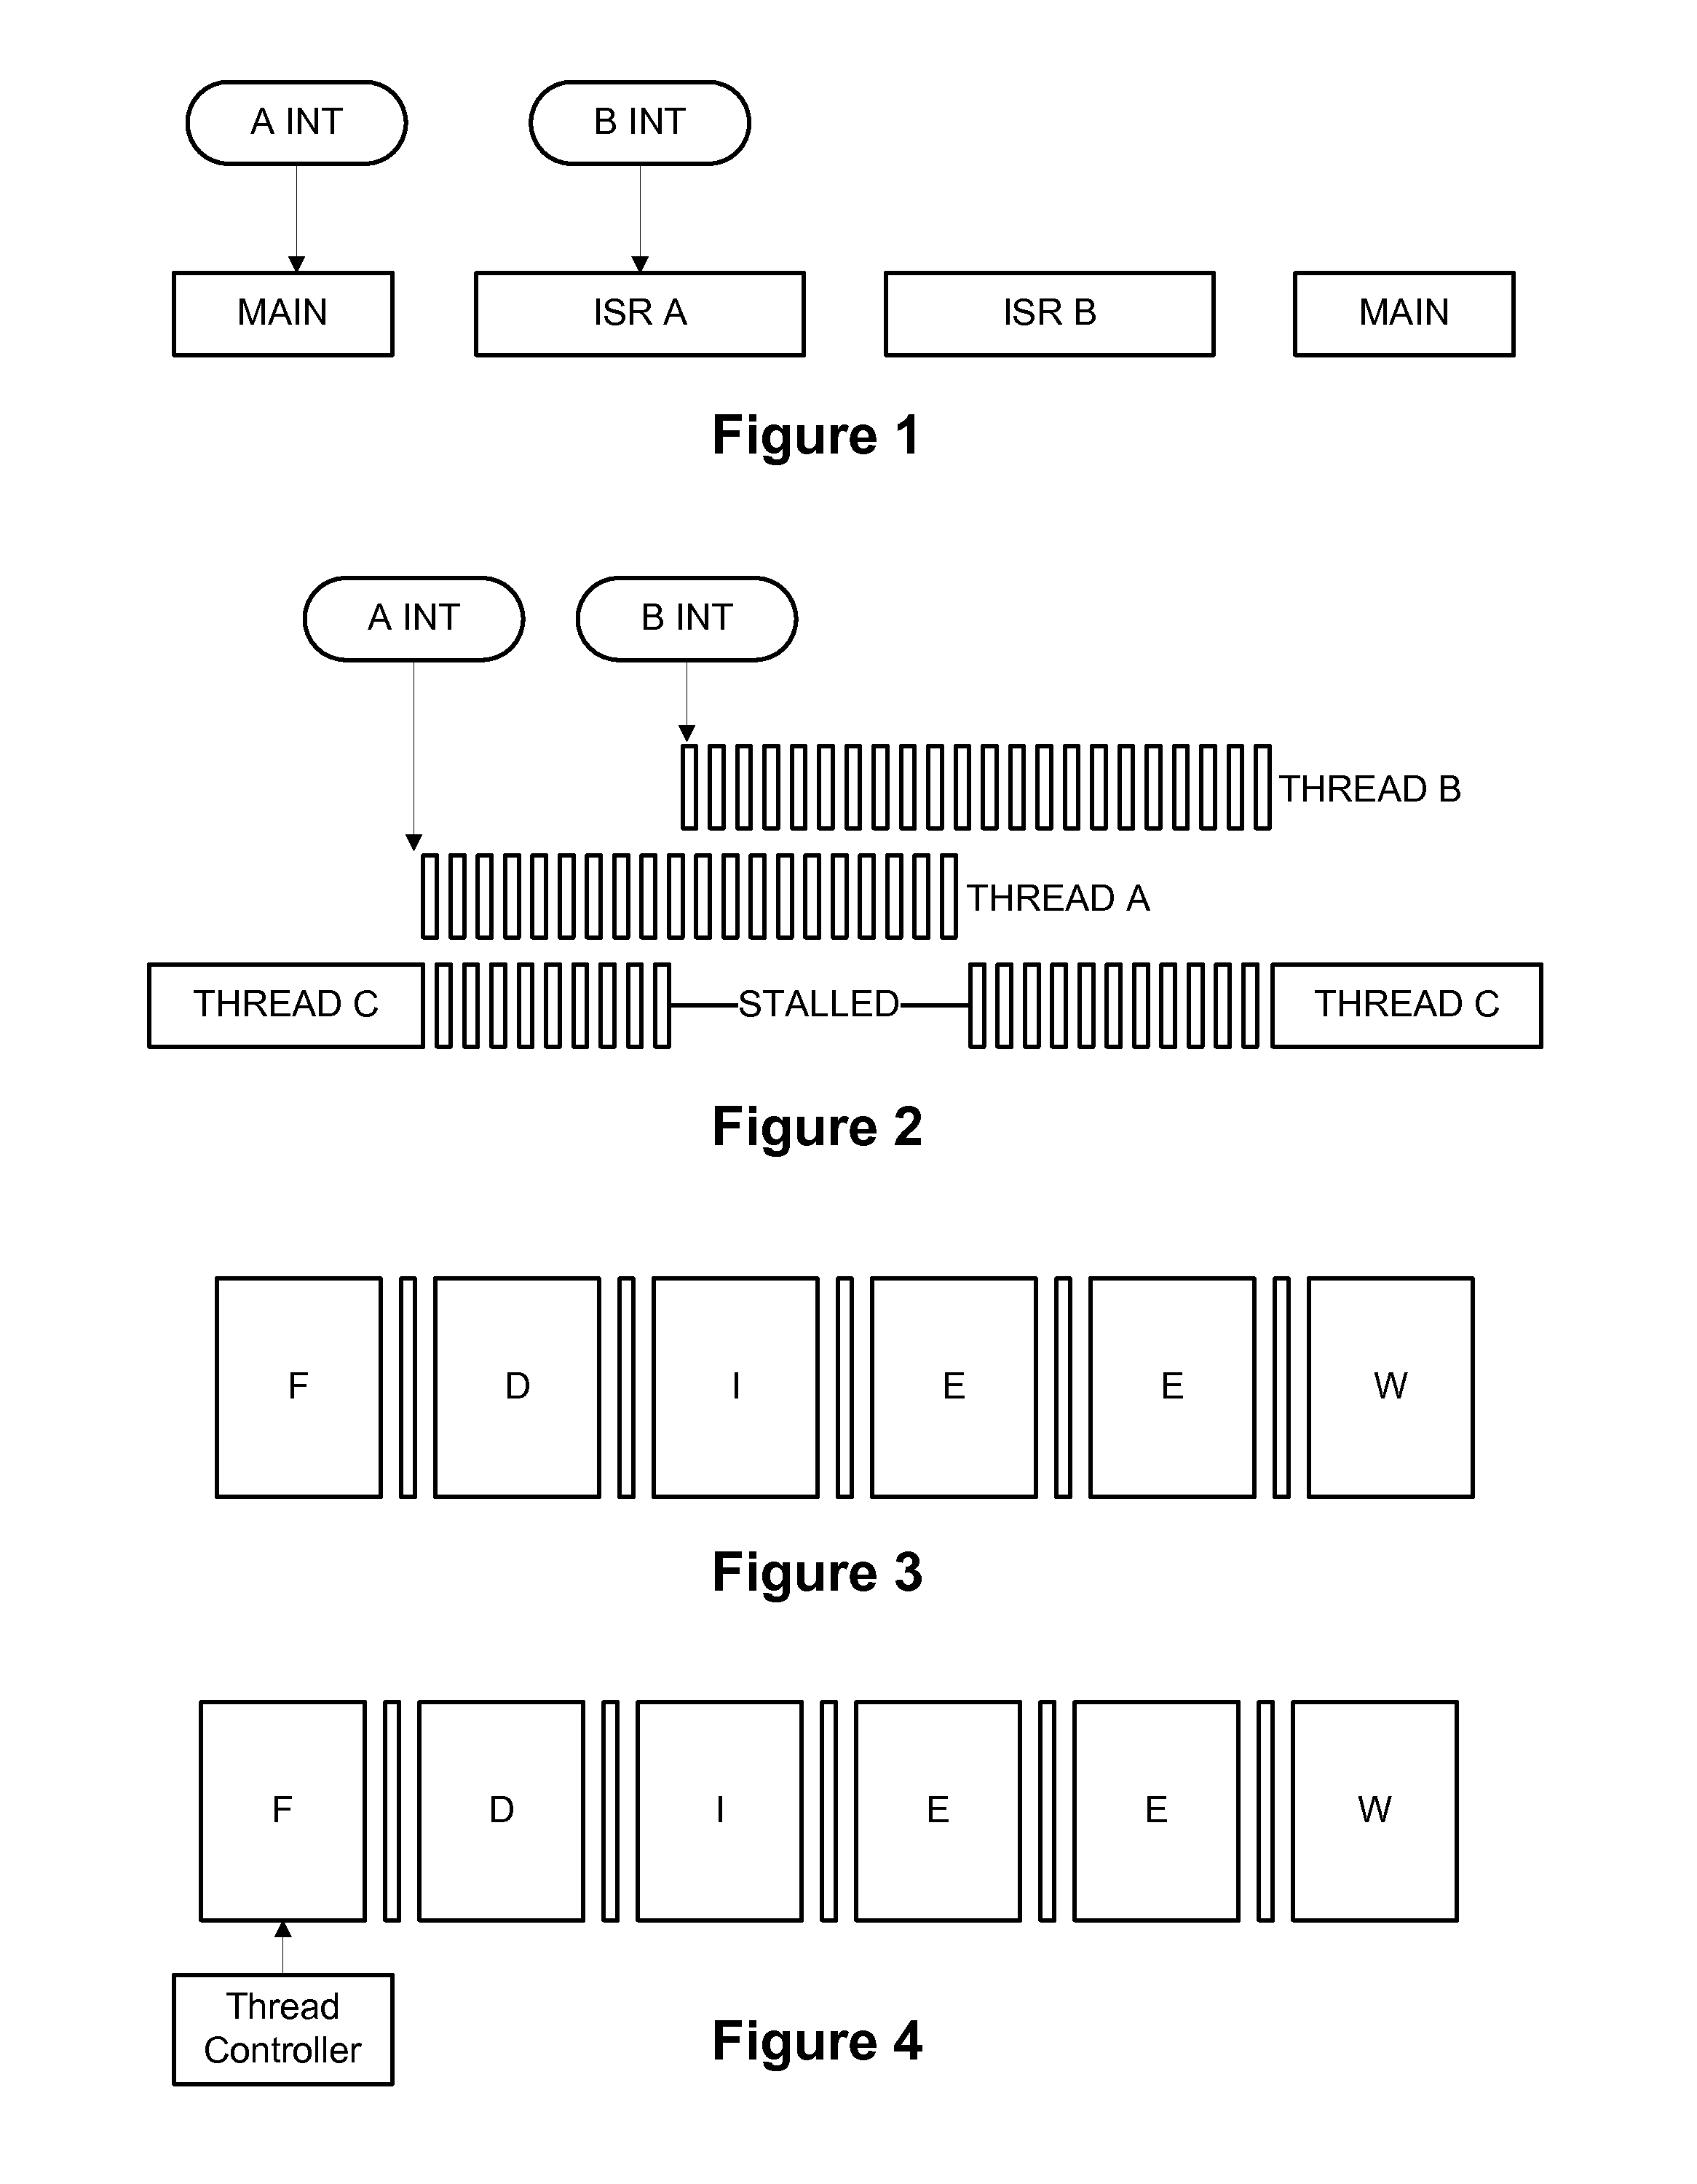 Instruction-level multithreading according to a predetermined fixed schedule in an embedded processor using zero-time context switching